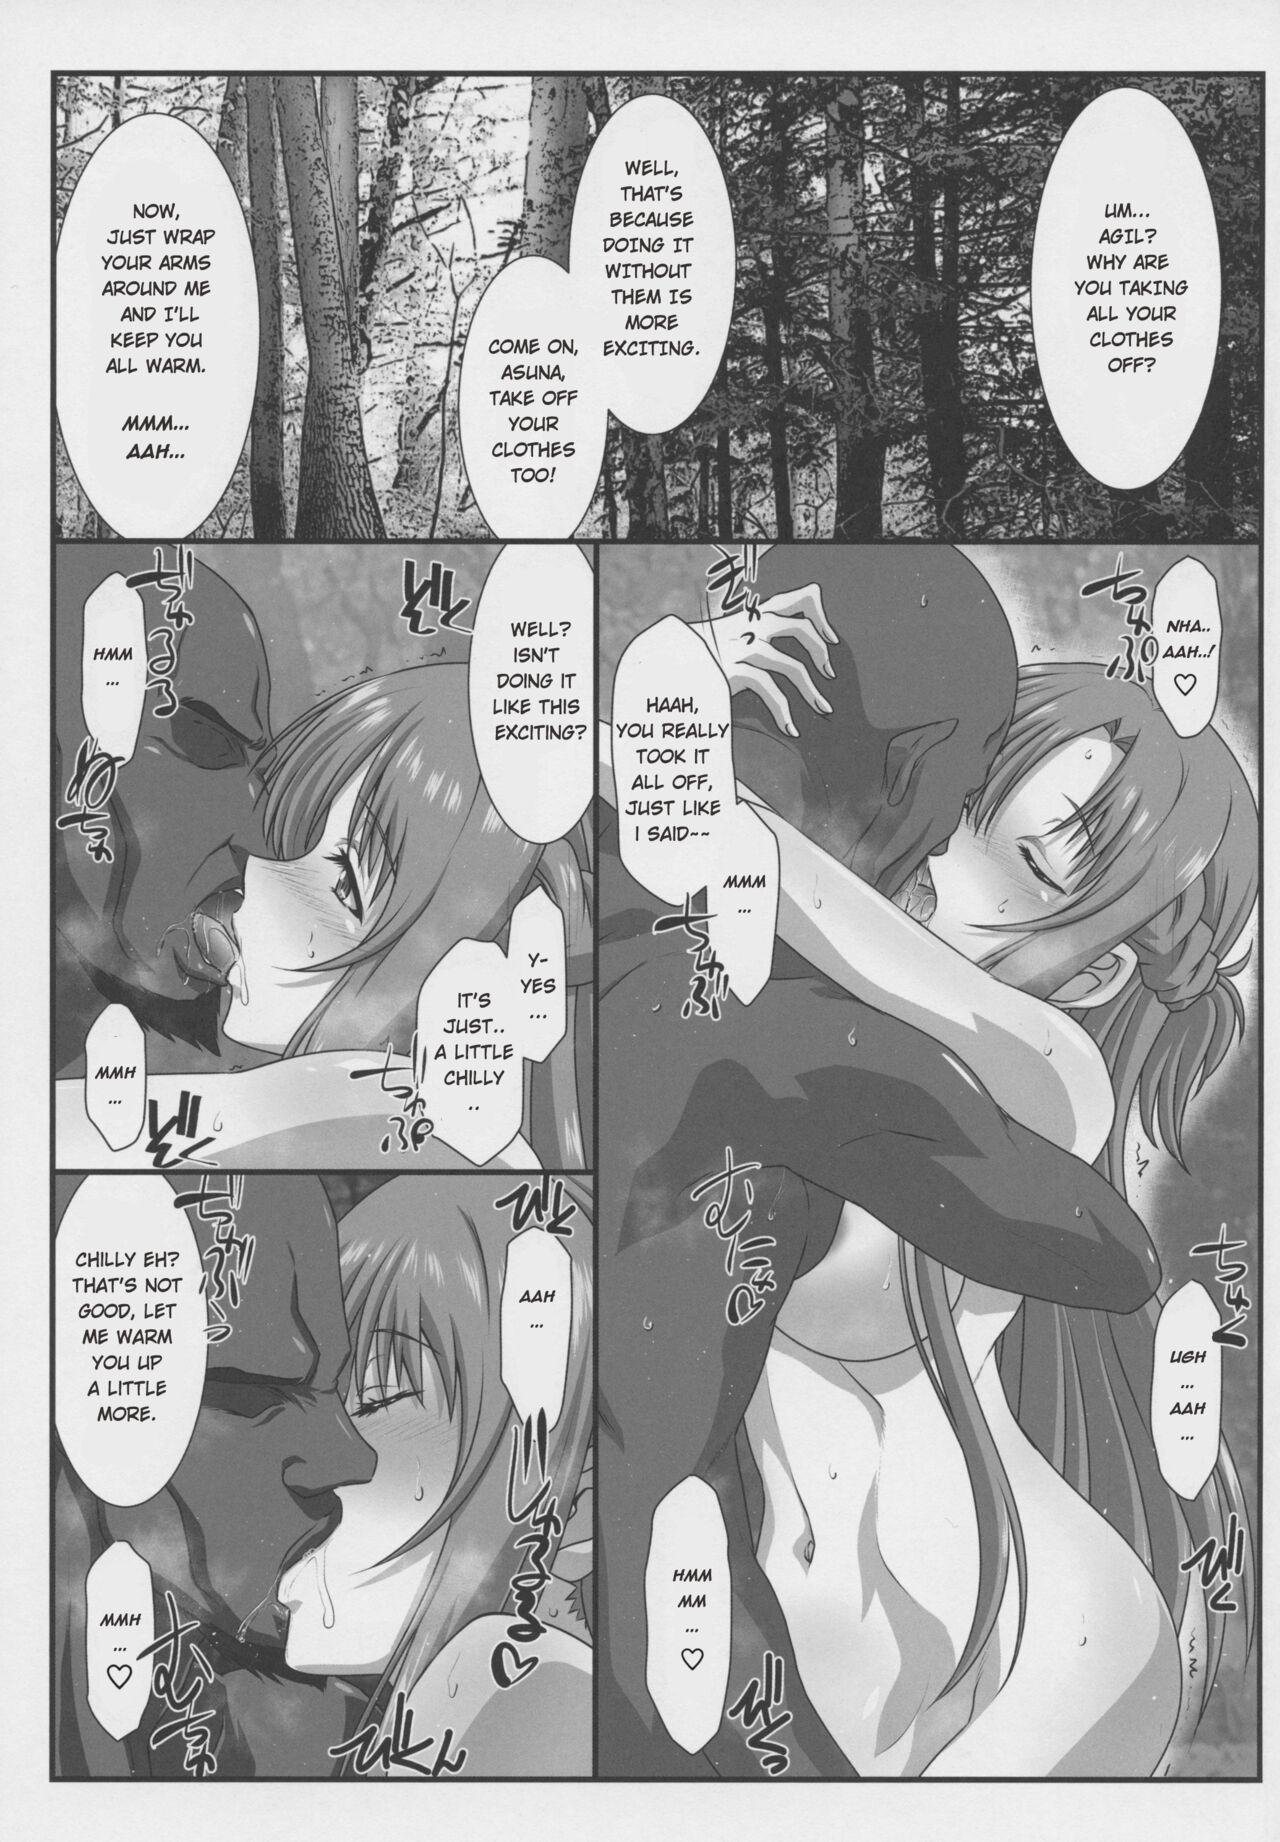 Gaystraight Astral Bout Ver. 45 - Sword art online Pau - Page 4